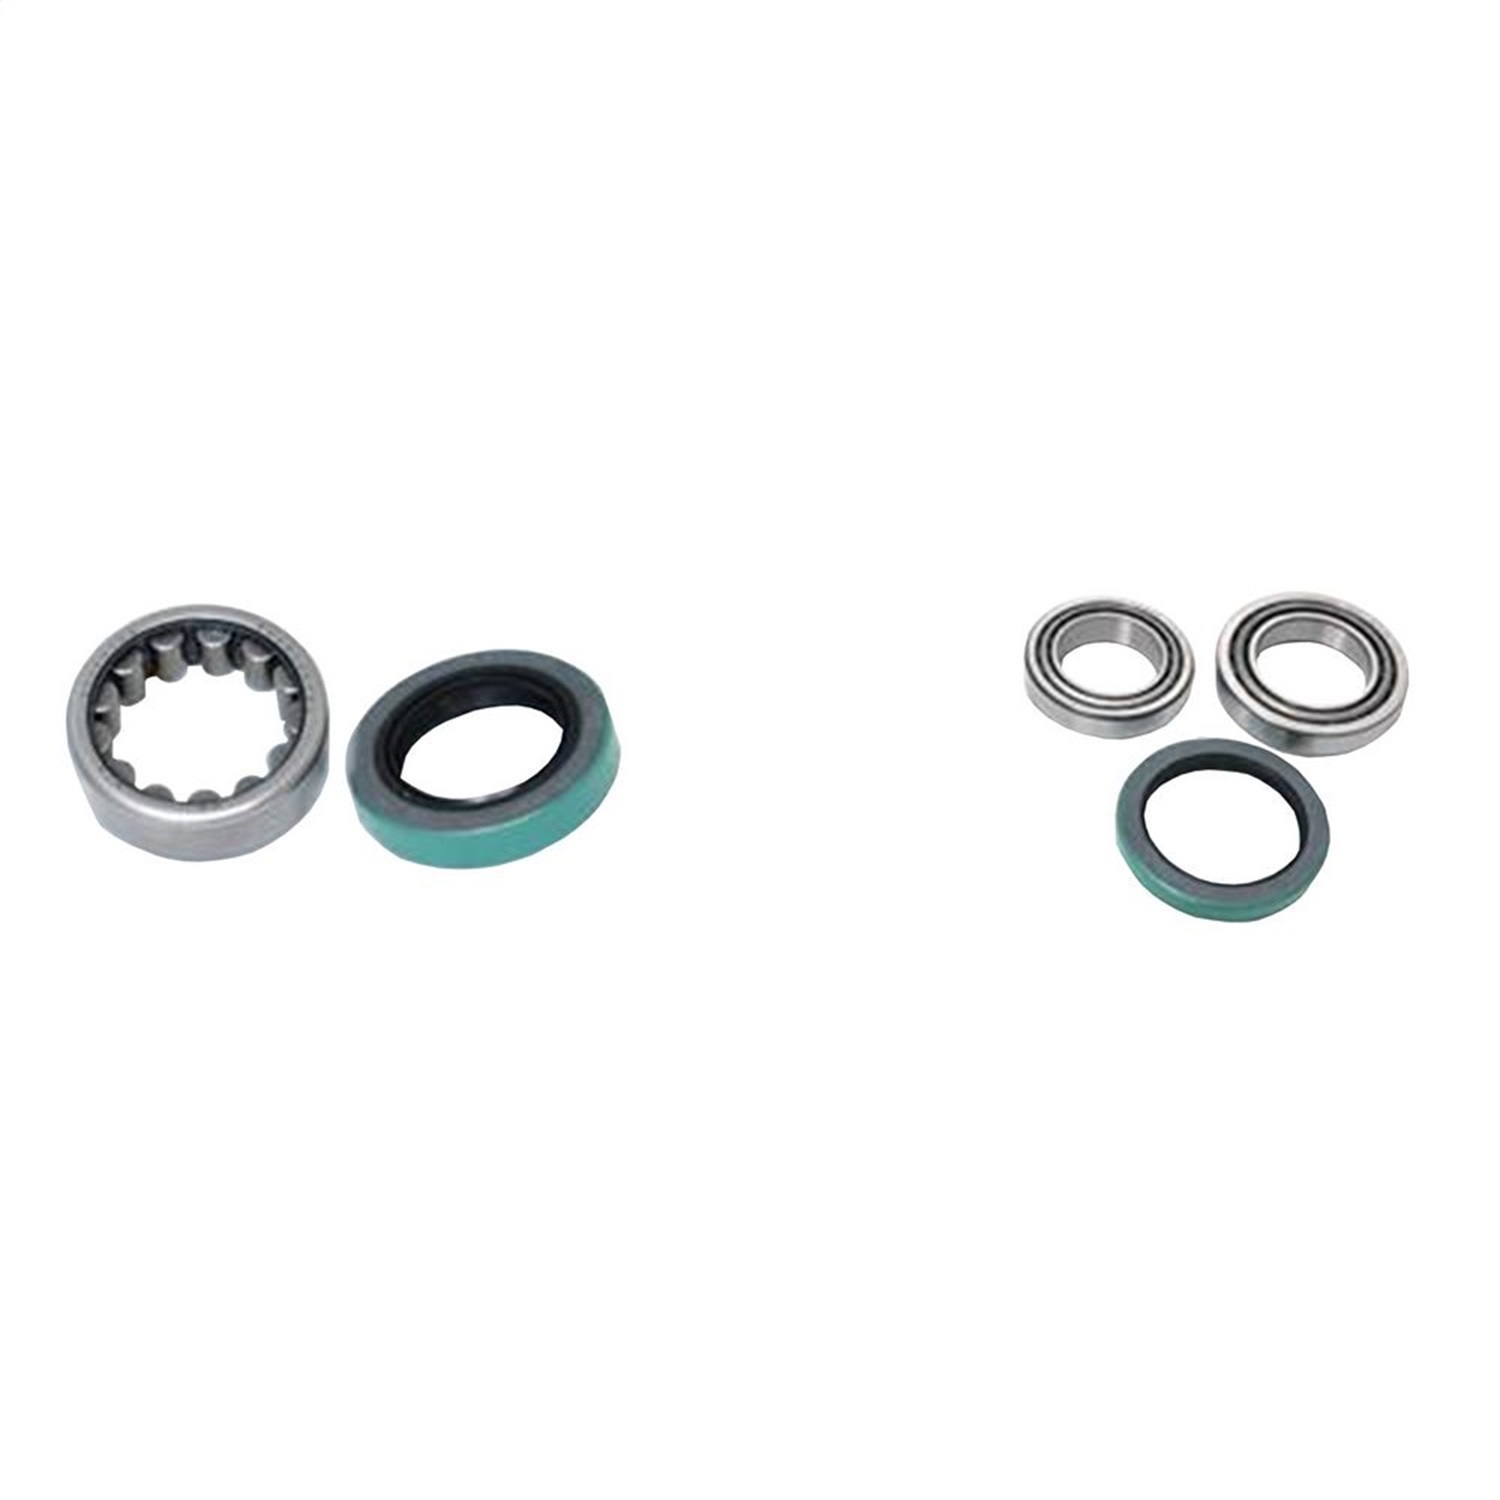 G2 Axle and Gear G2 Axle and Gear 30-8014 Wheel Bearing Kit